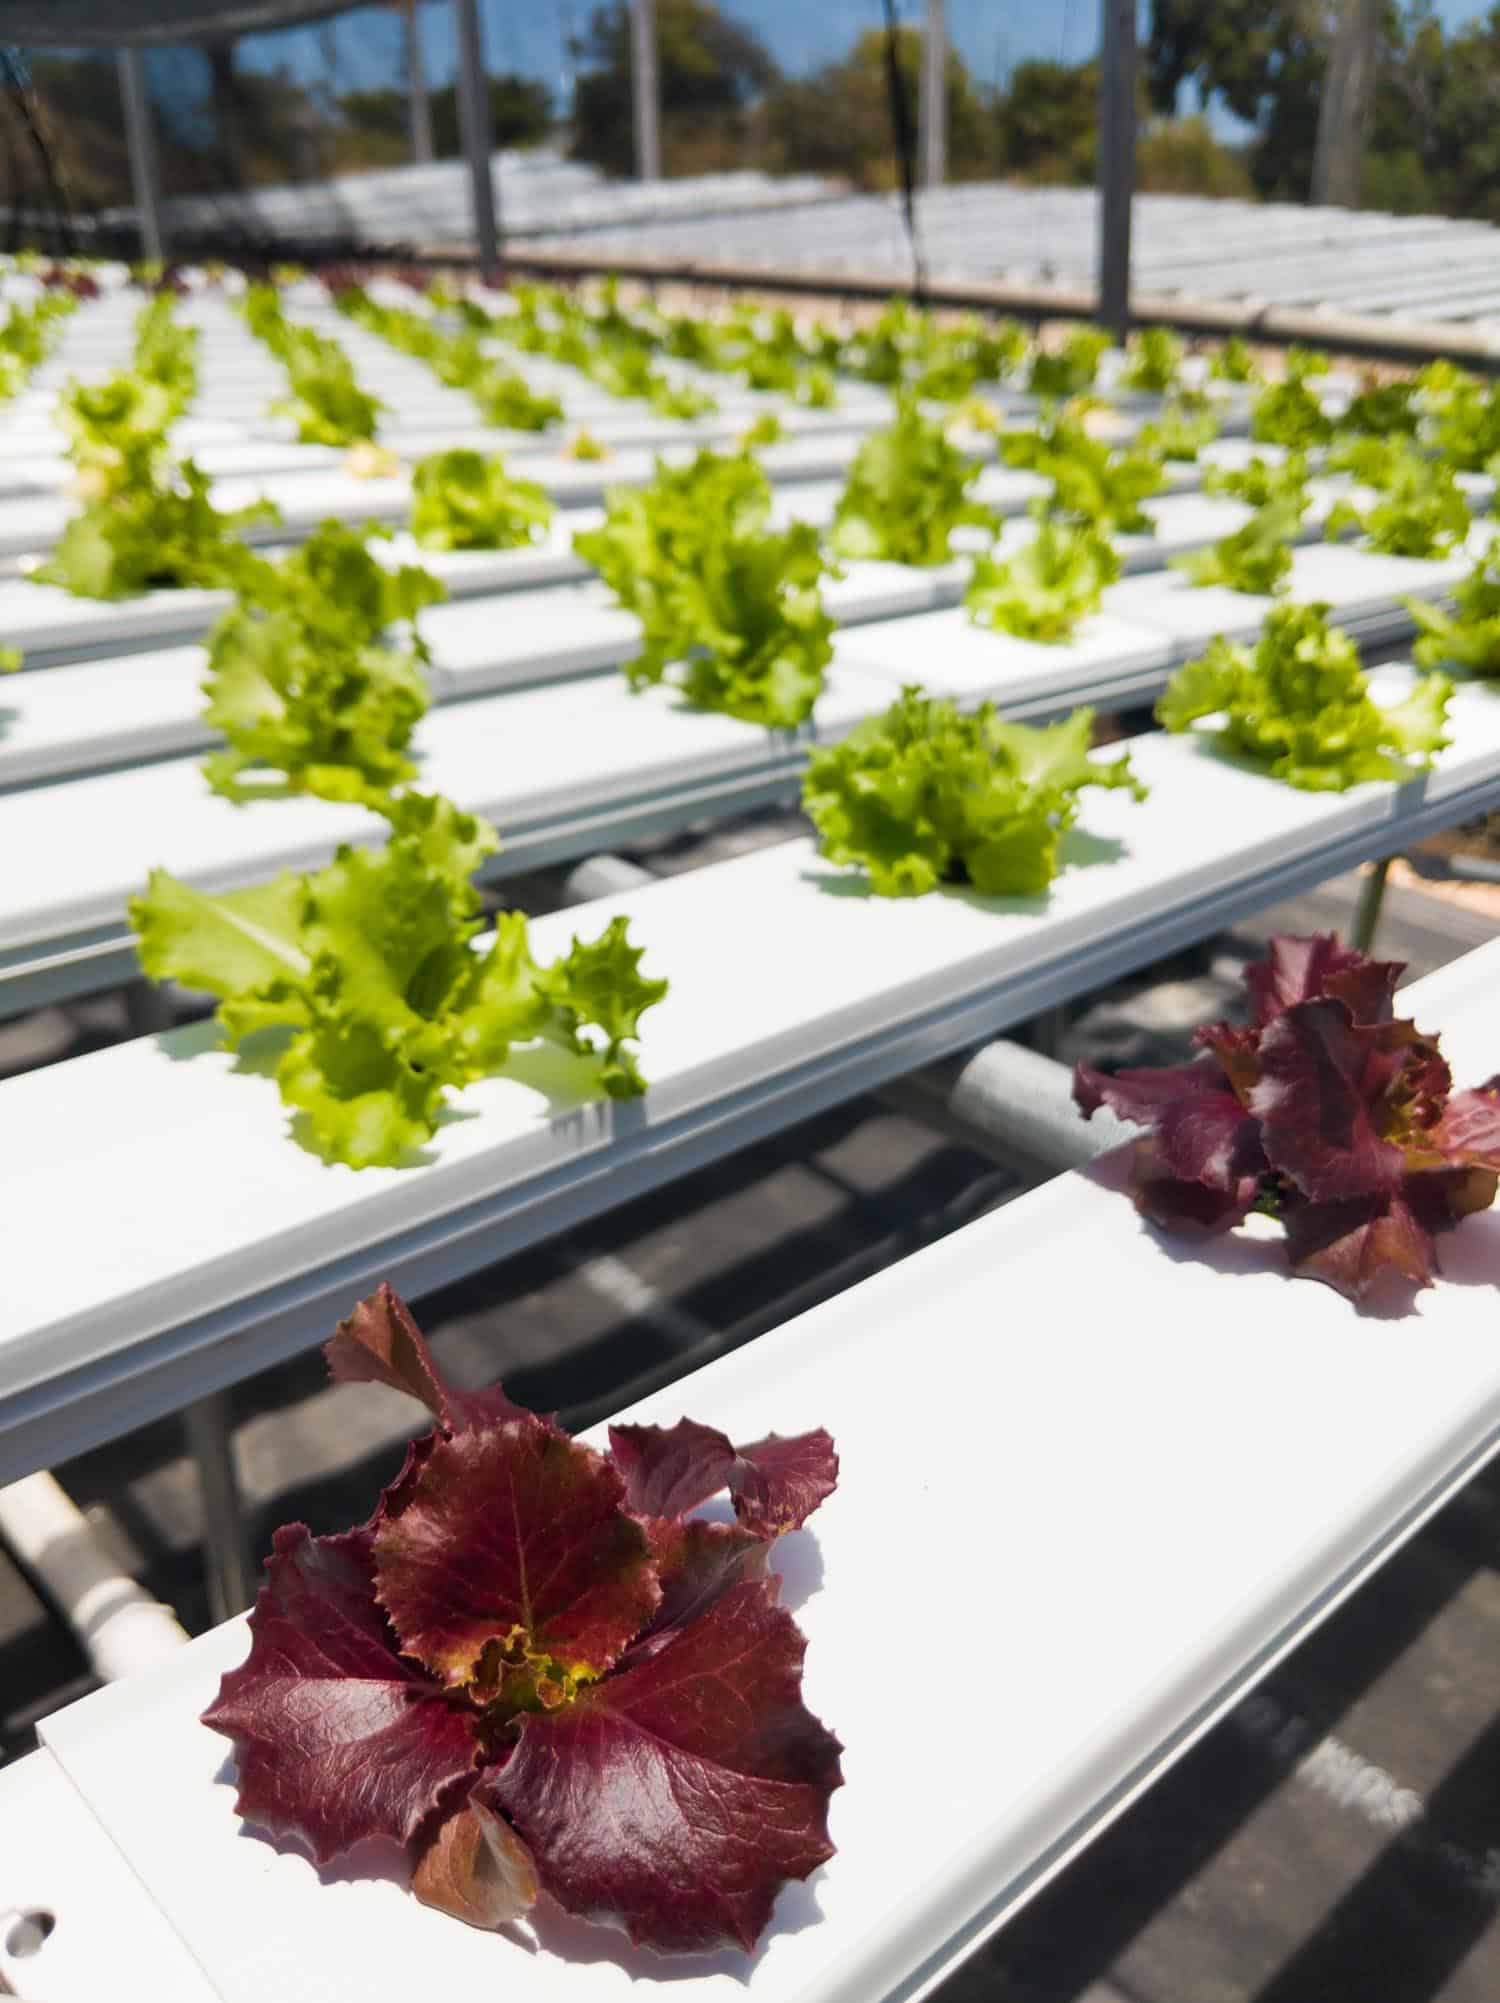 Lettuce grown with aquaponics in Anguilla